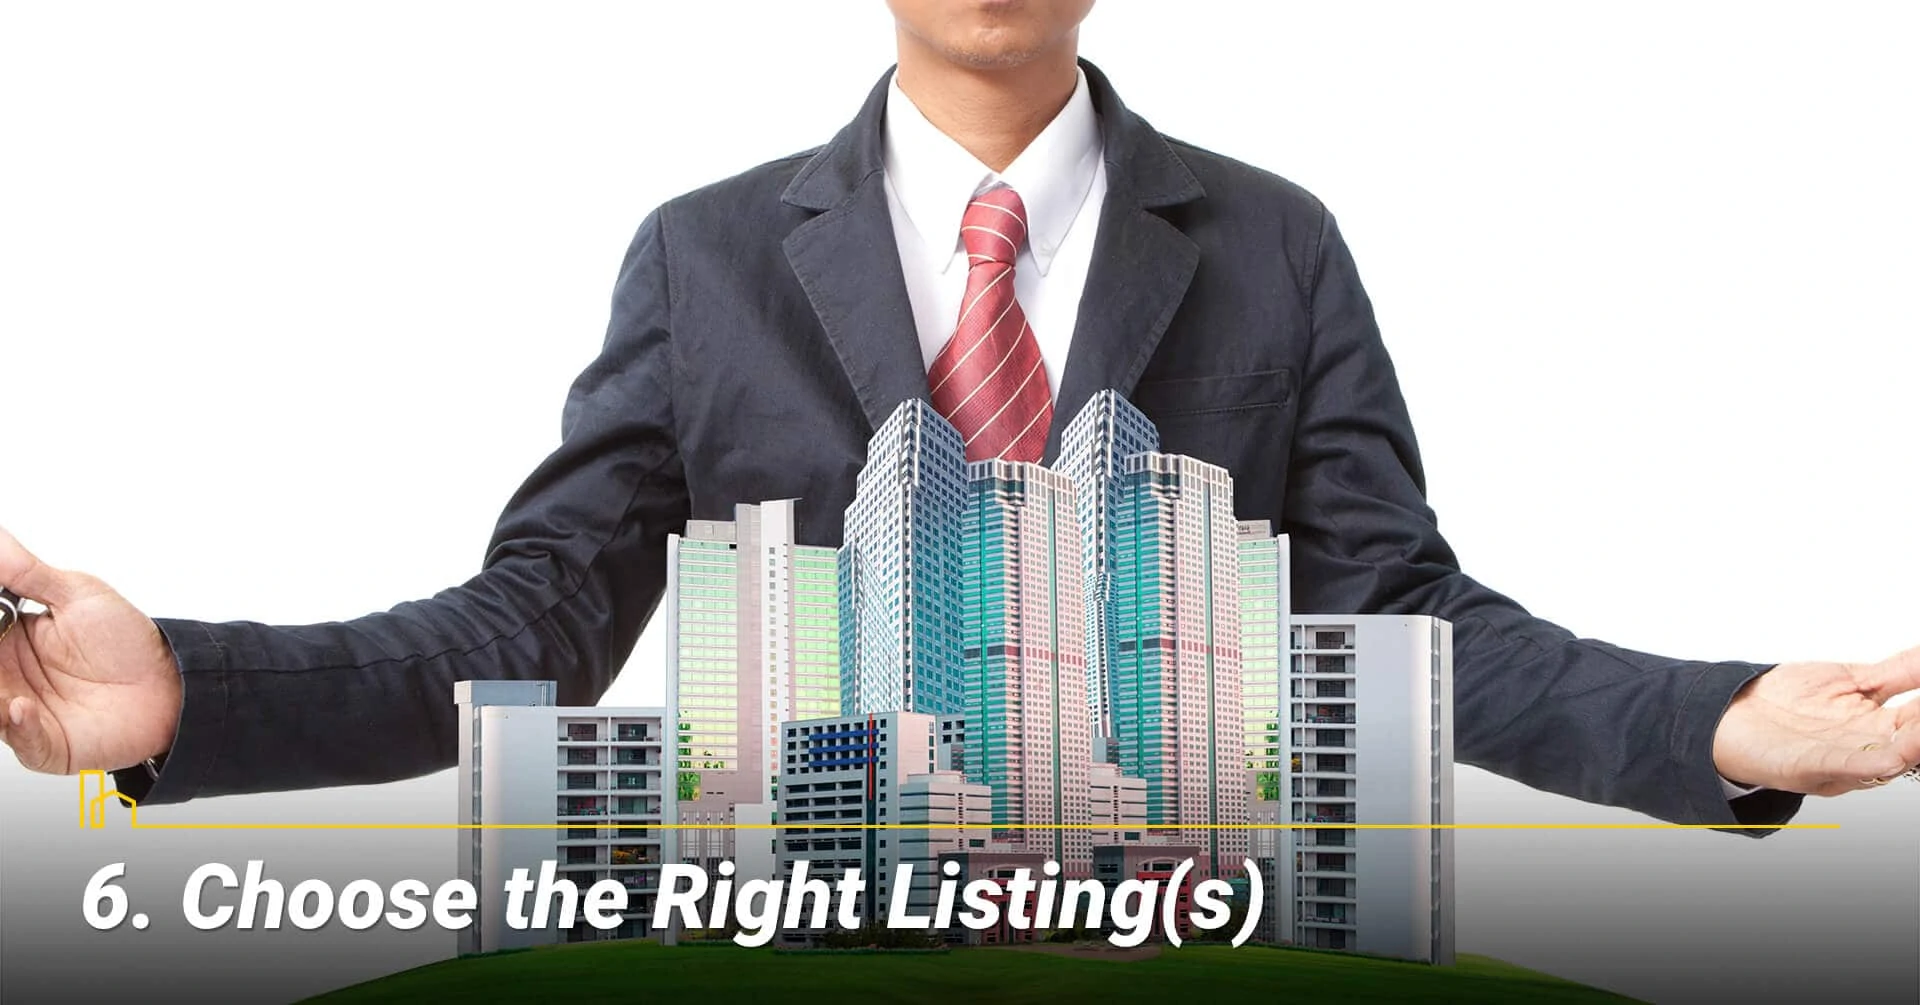 Choose the Right Listing(s), select the proper listing